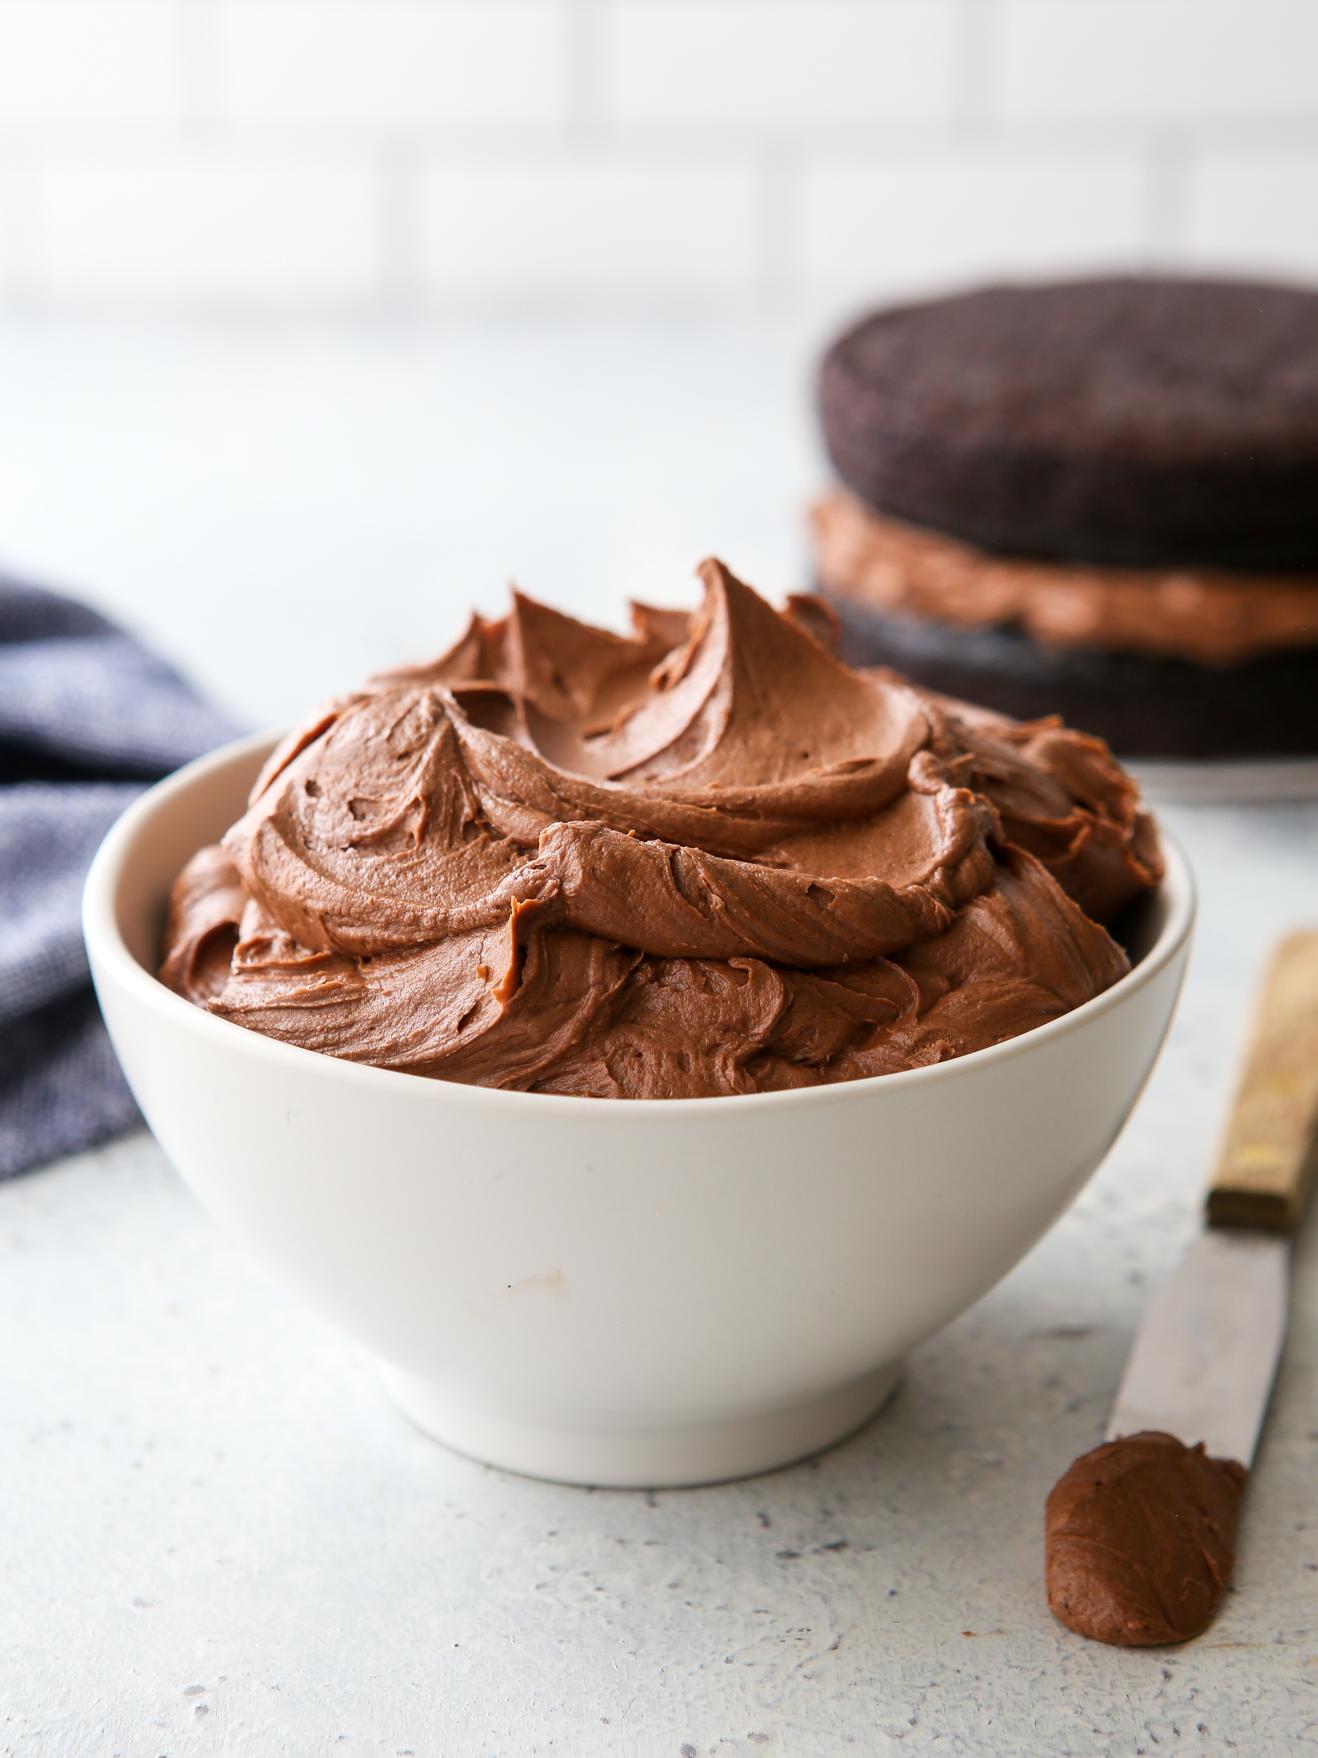  Indulge in chocolate heaven with this Mocha Fudge Icing!